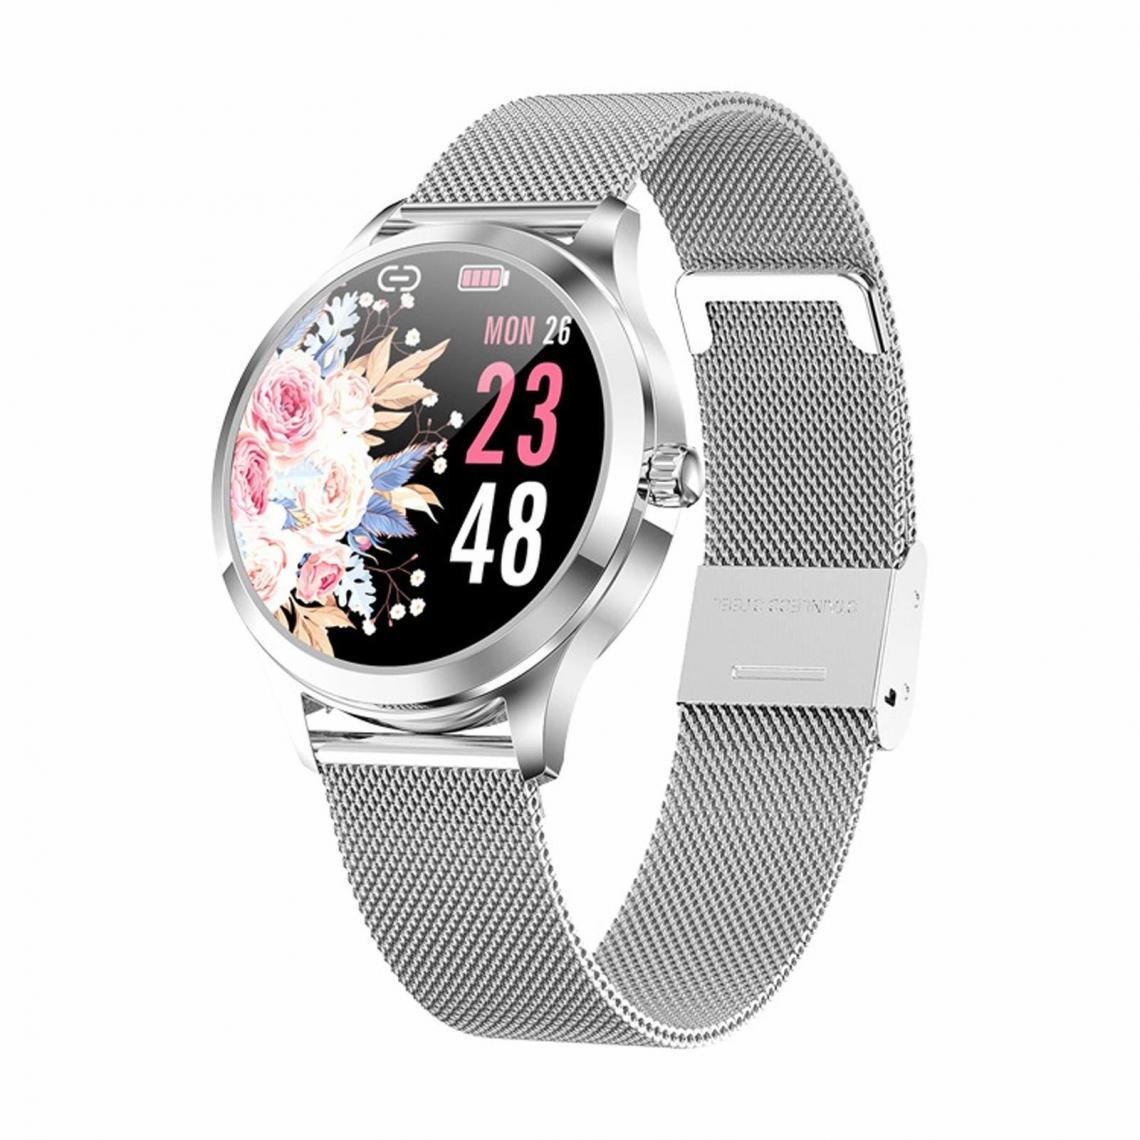 Chronotech Montres - Chronus Fashion Ladies Smart Watches, Waterproof Smart Watches, Multiple Modes, Bluetooth Message Push, Exquisite Gifts for Ladies(silver) - Montre connectée